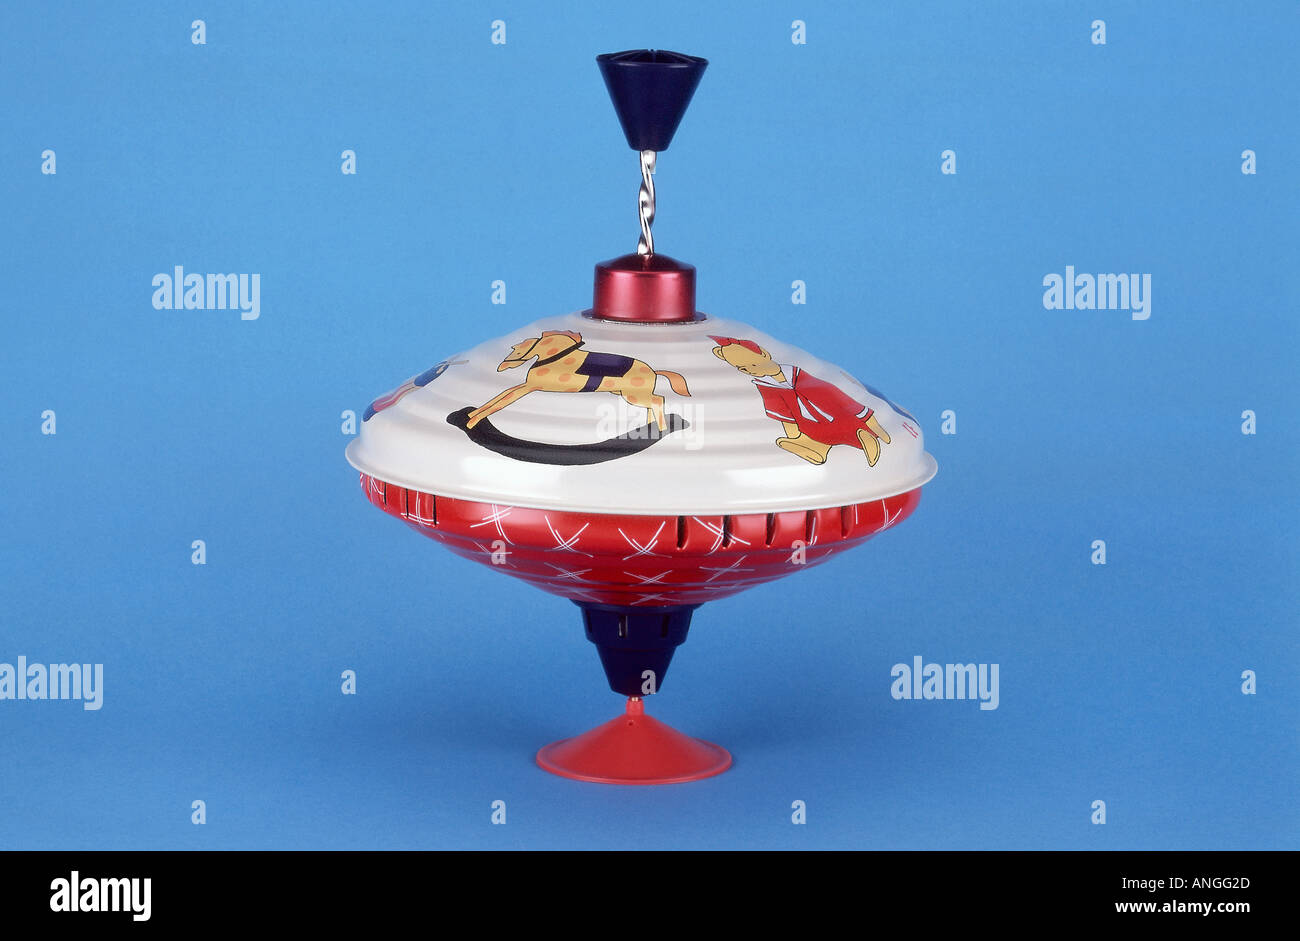 Vintage toy spinning top on blue background Stock Photo